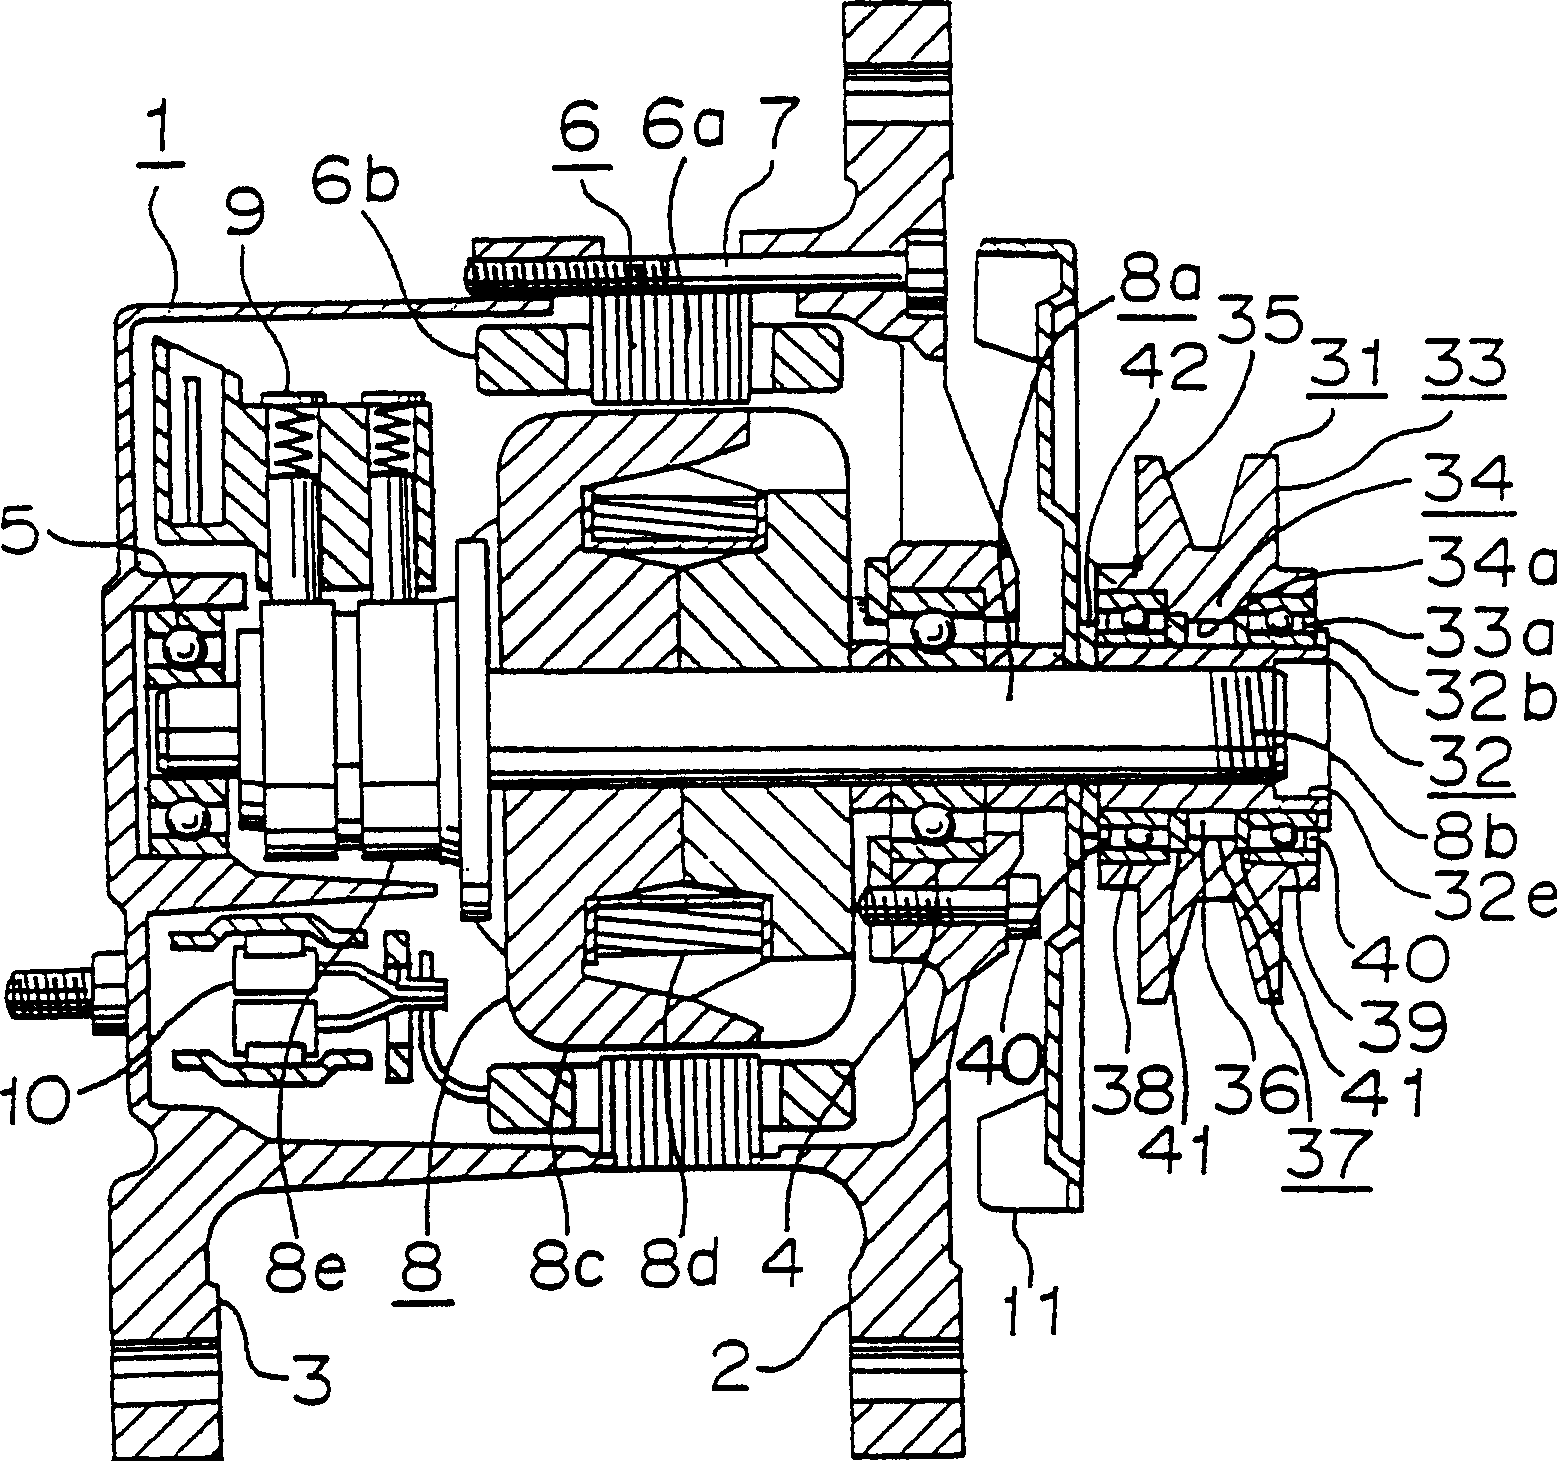 Battery charging generator for vehicle